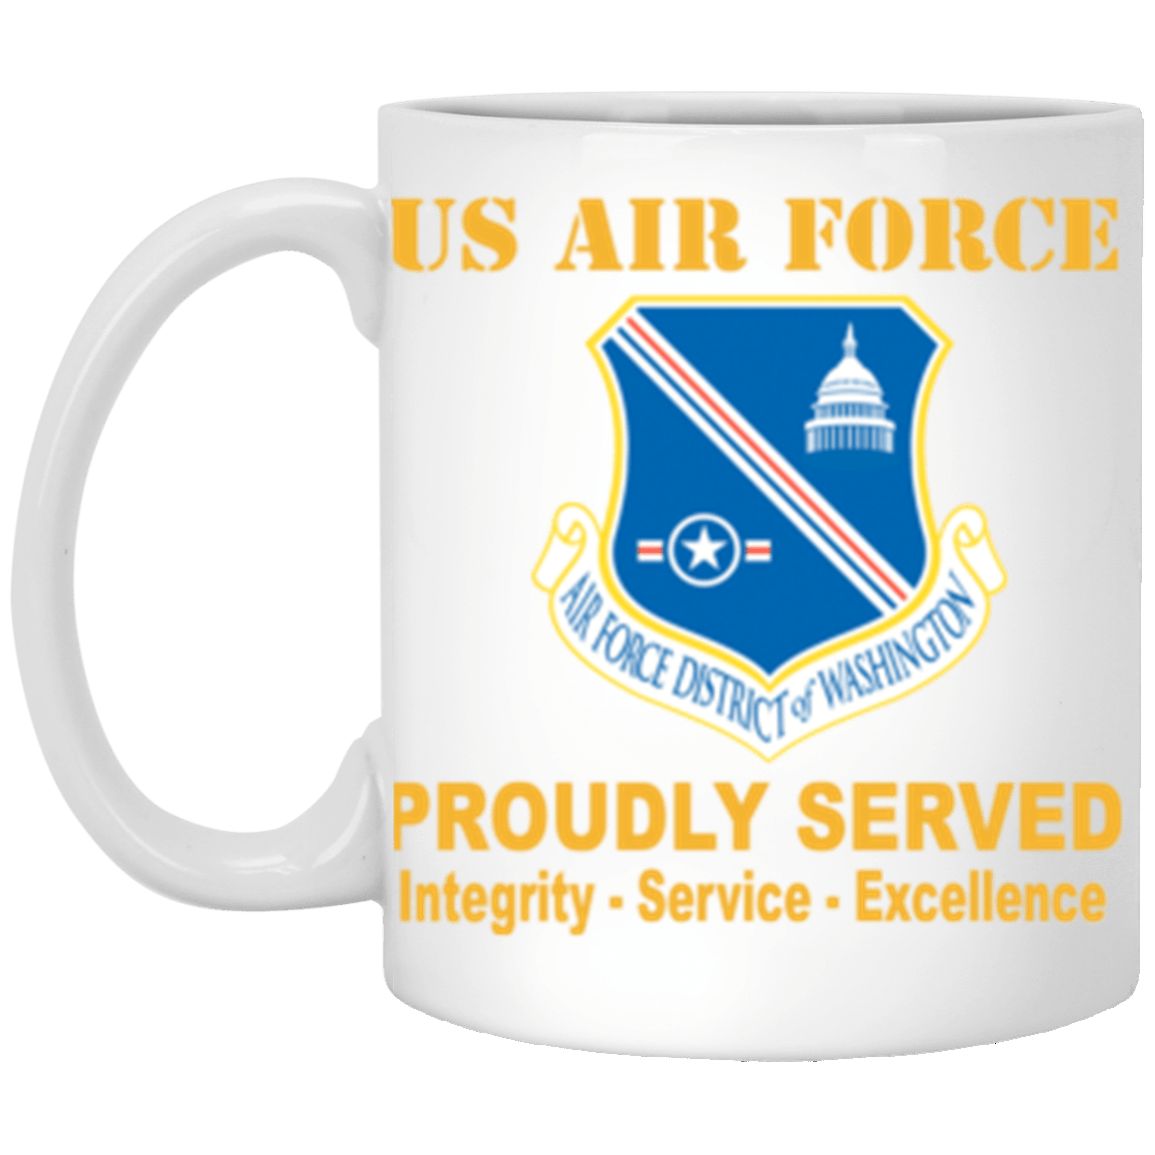 US Air Force District of Washington Proudly Served Core Values 11 oz. White Mug-Drinkware-Veterans Nation